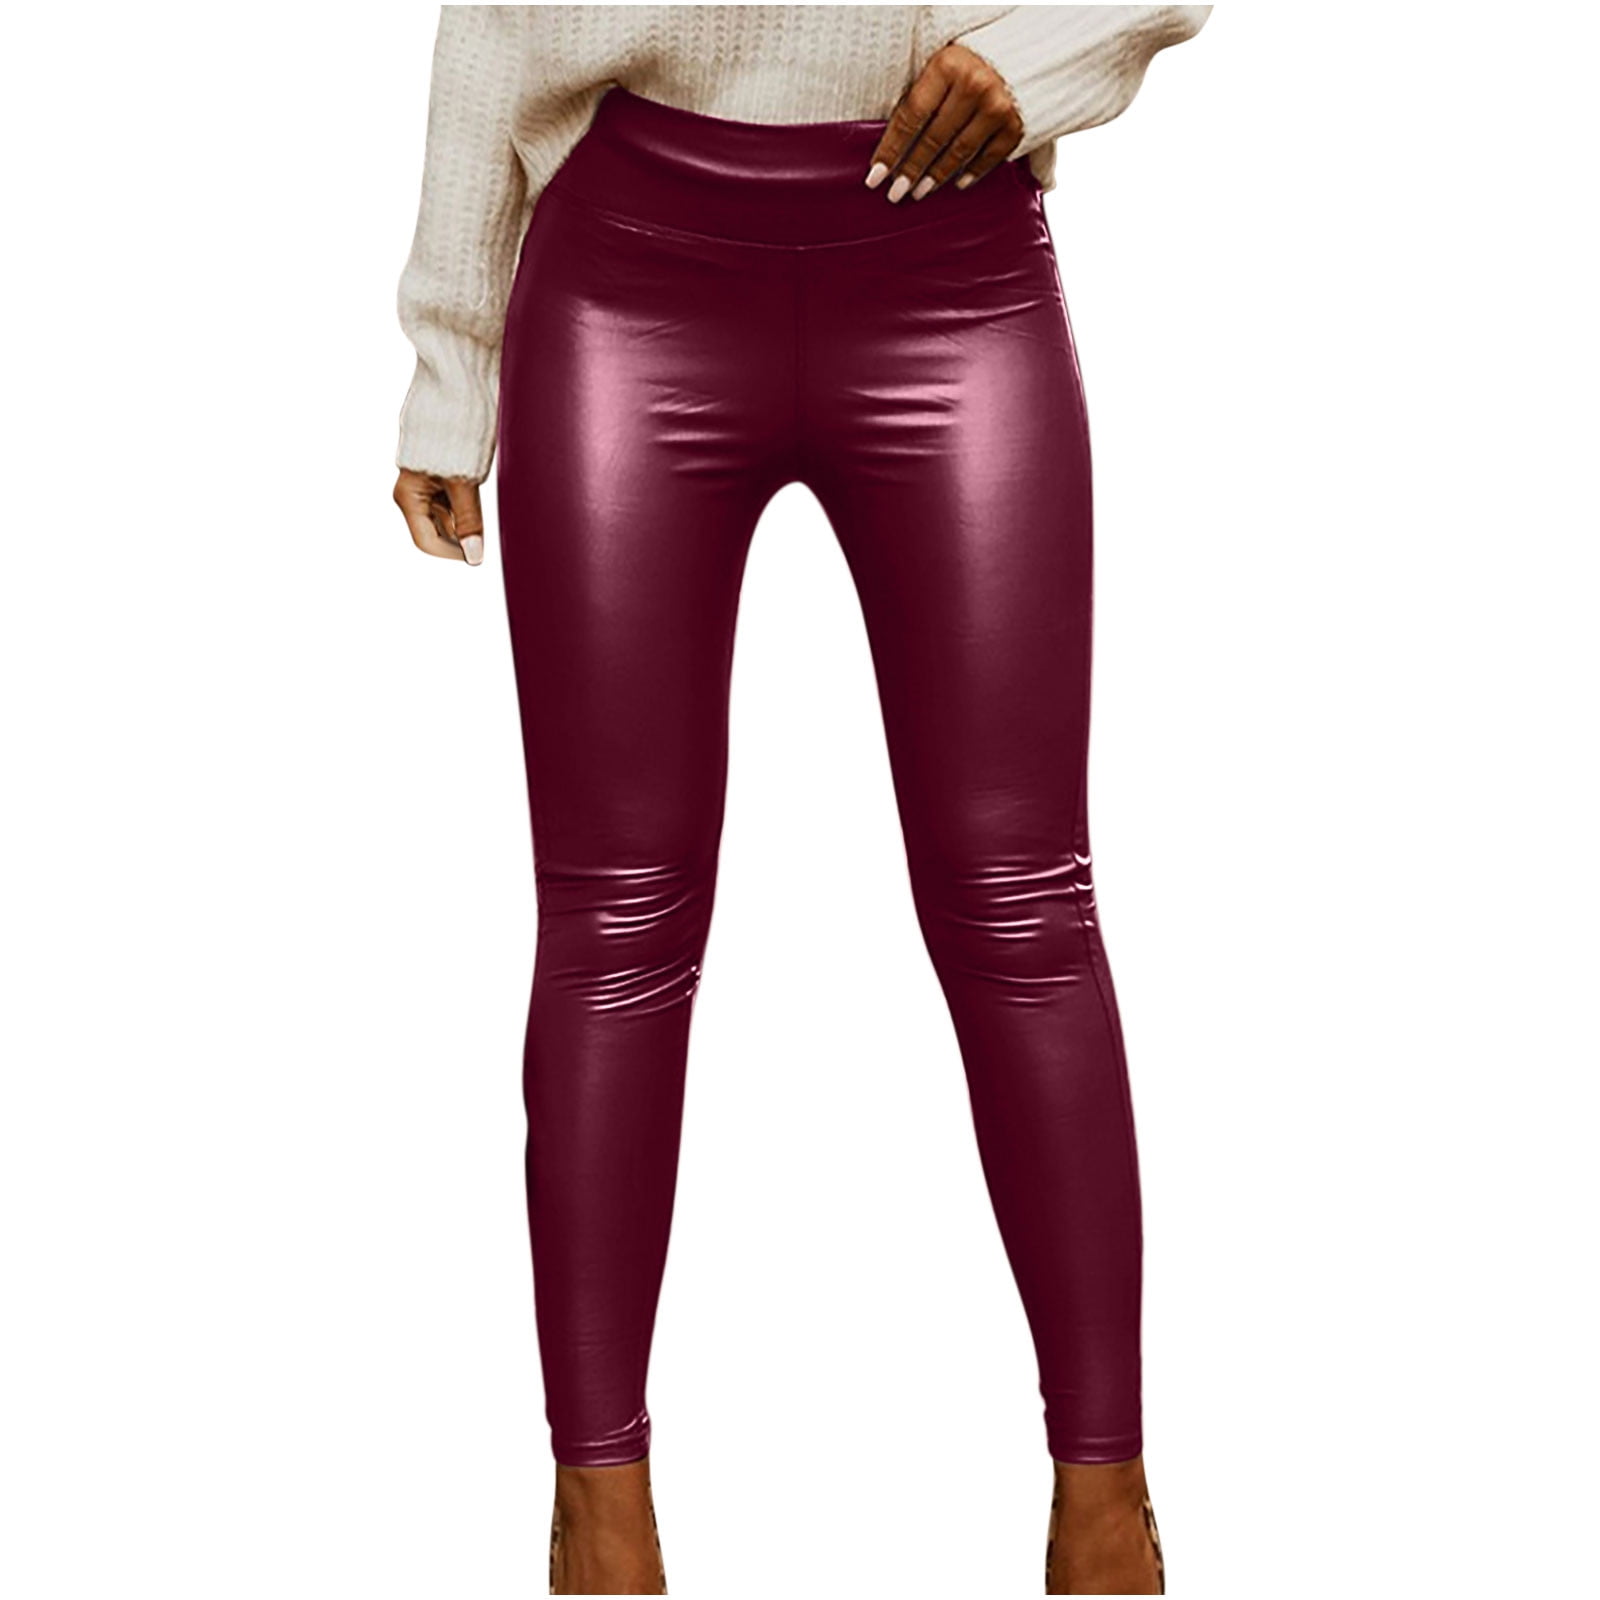 Women's Faux Leather Leggings Pants High Waisted Butt Lifting